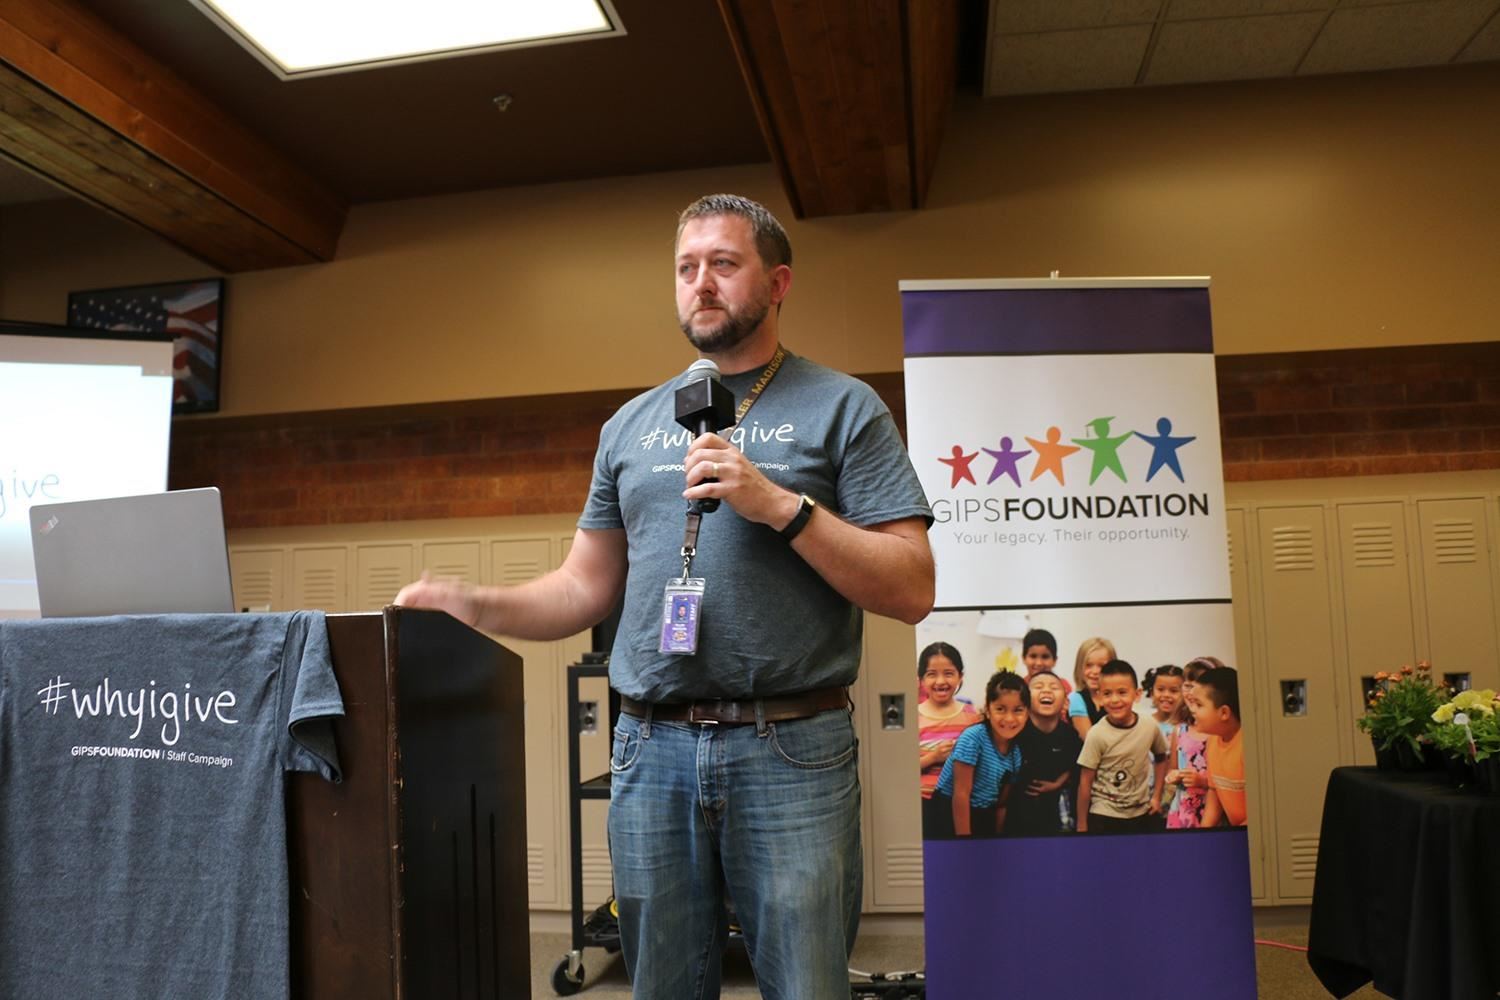 Mr. Madison presenting at a GIPS Foundation event in 2019.